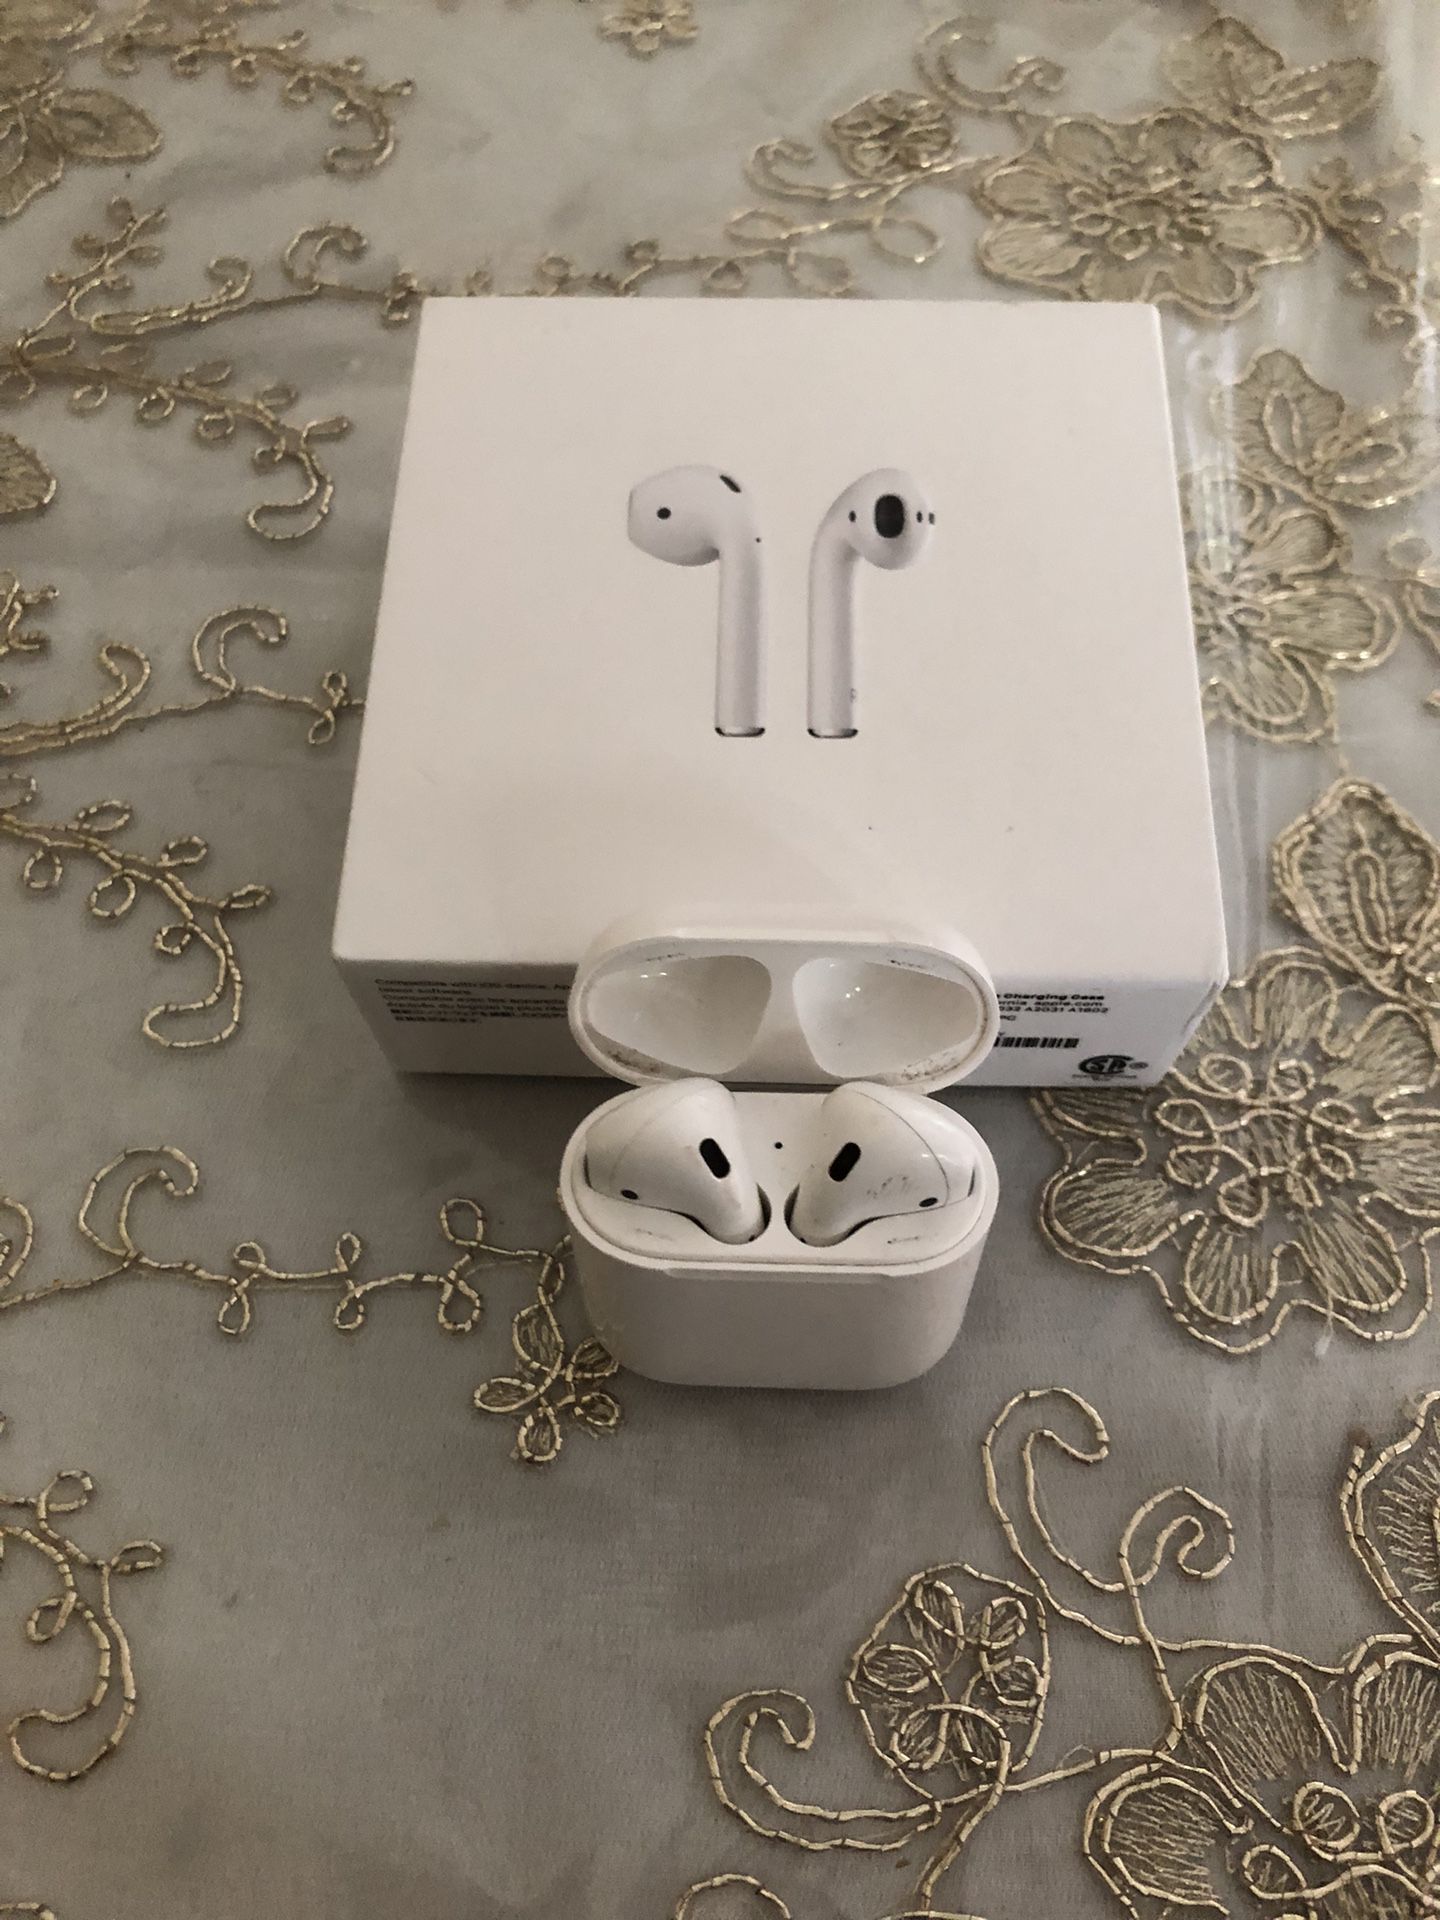 Apple AirPods Gen 2 + Barely Used